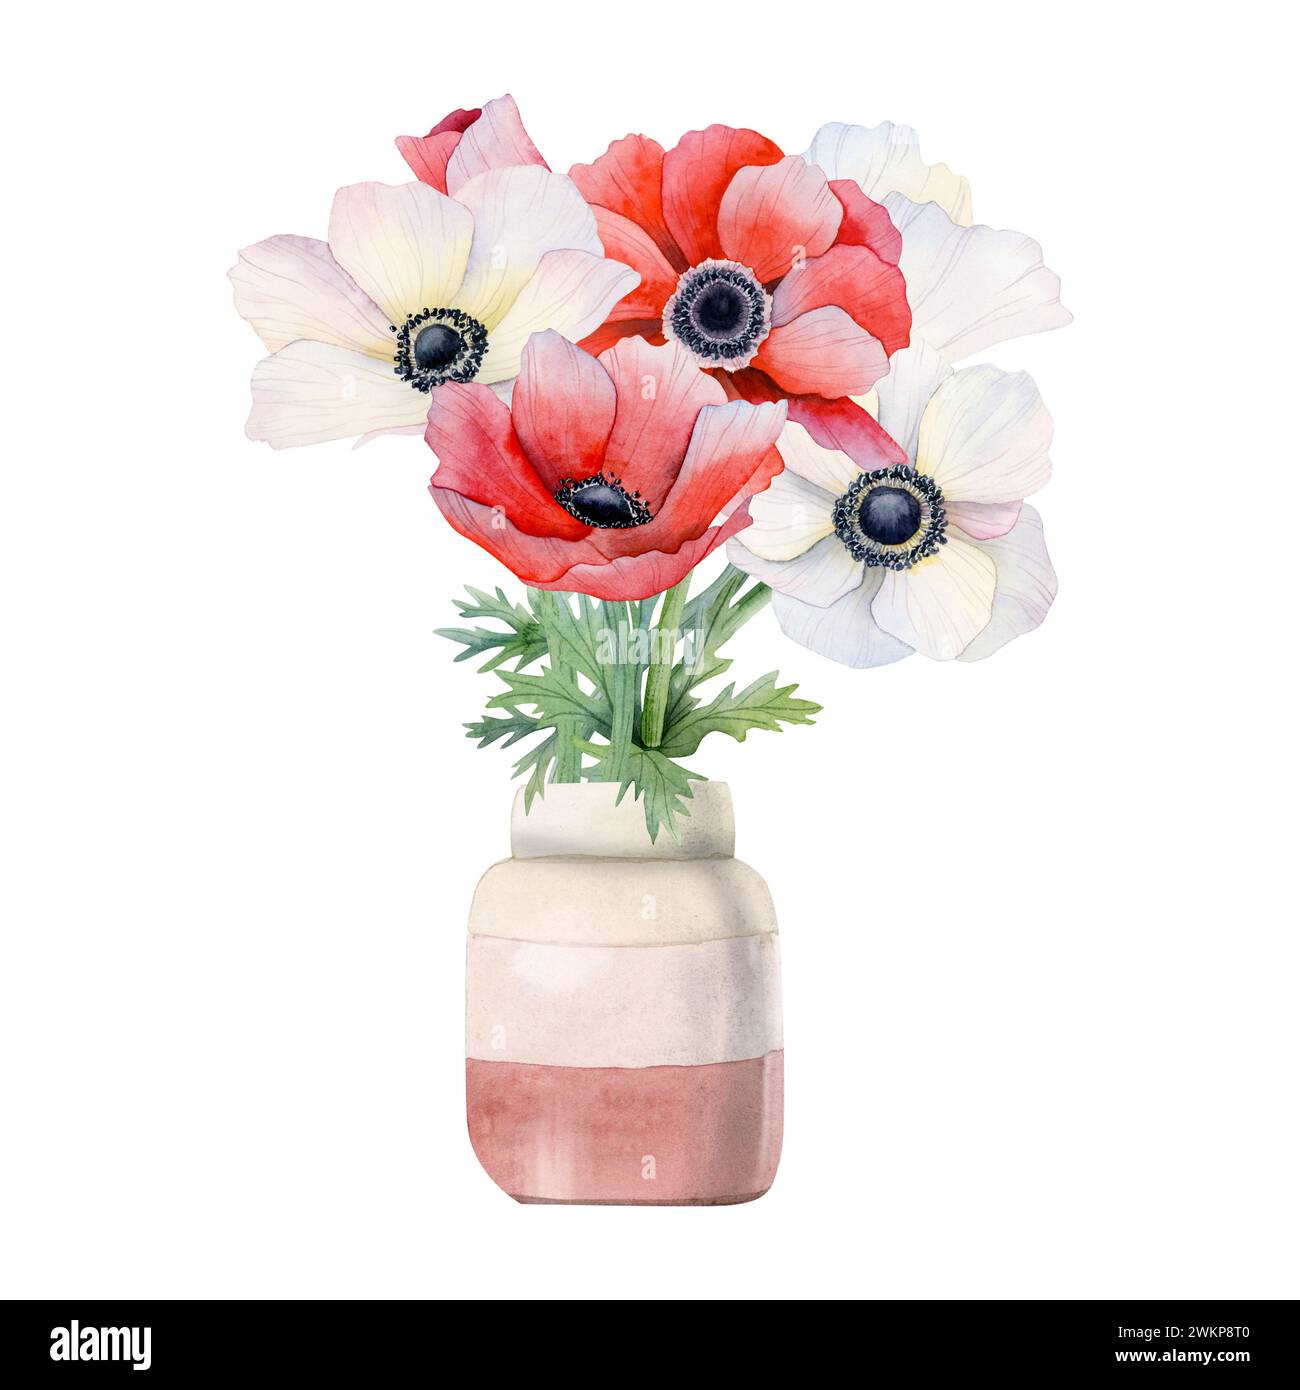 Anemones wildflowers bouquet of white and red field poppies in ceramic pale pink vase watercolor illustration Stock Photo